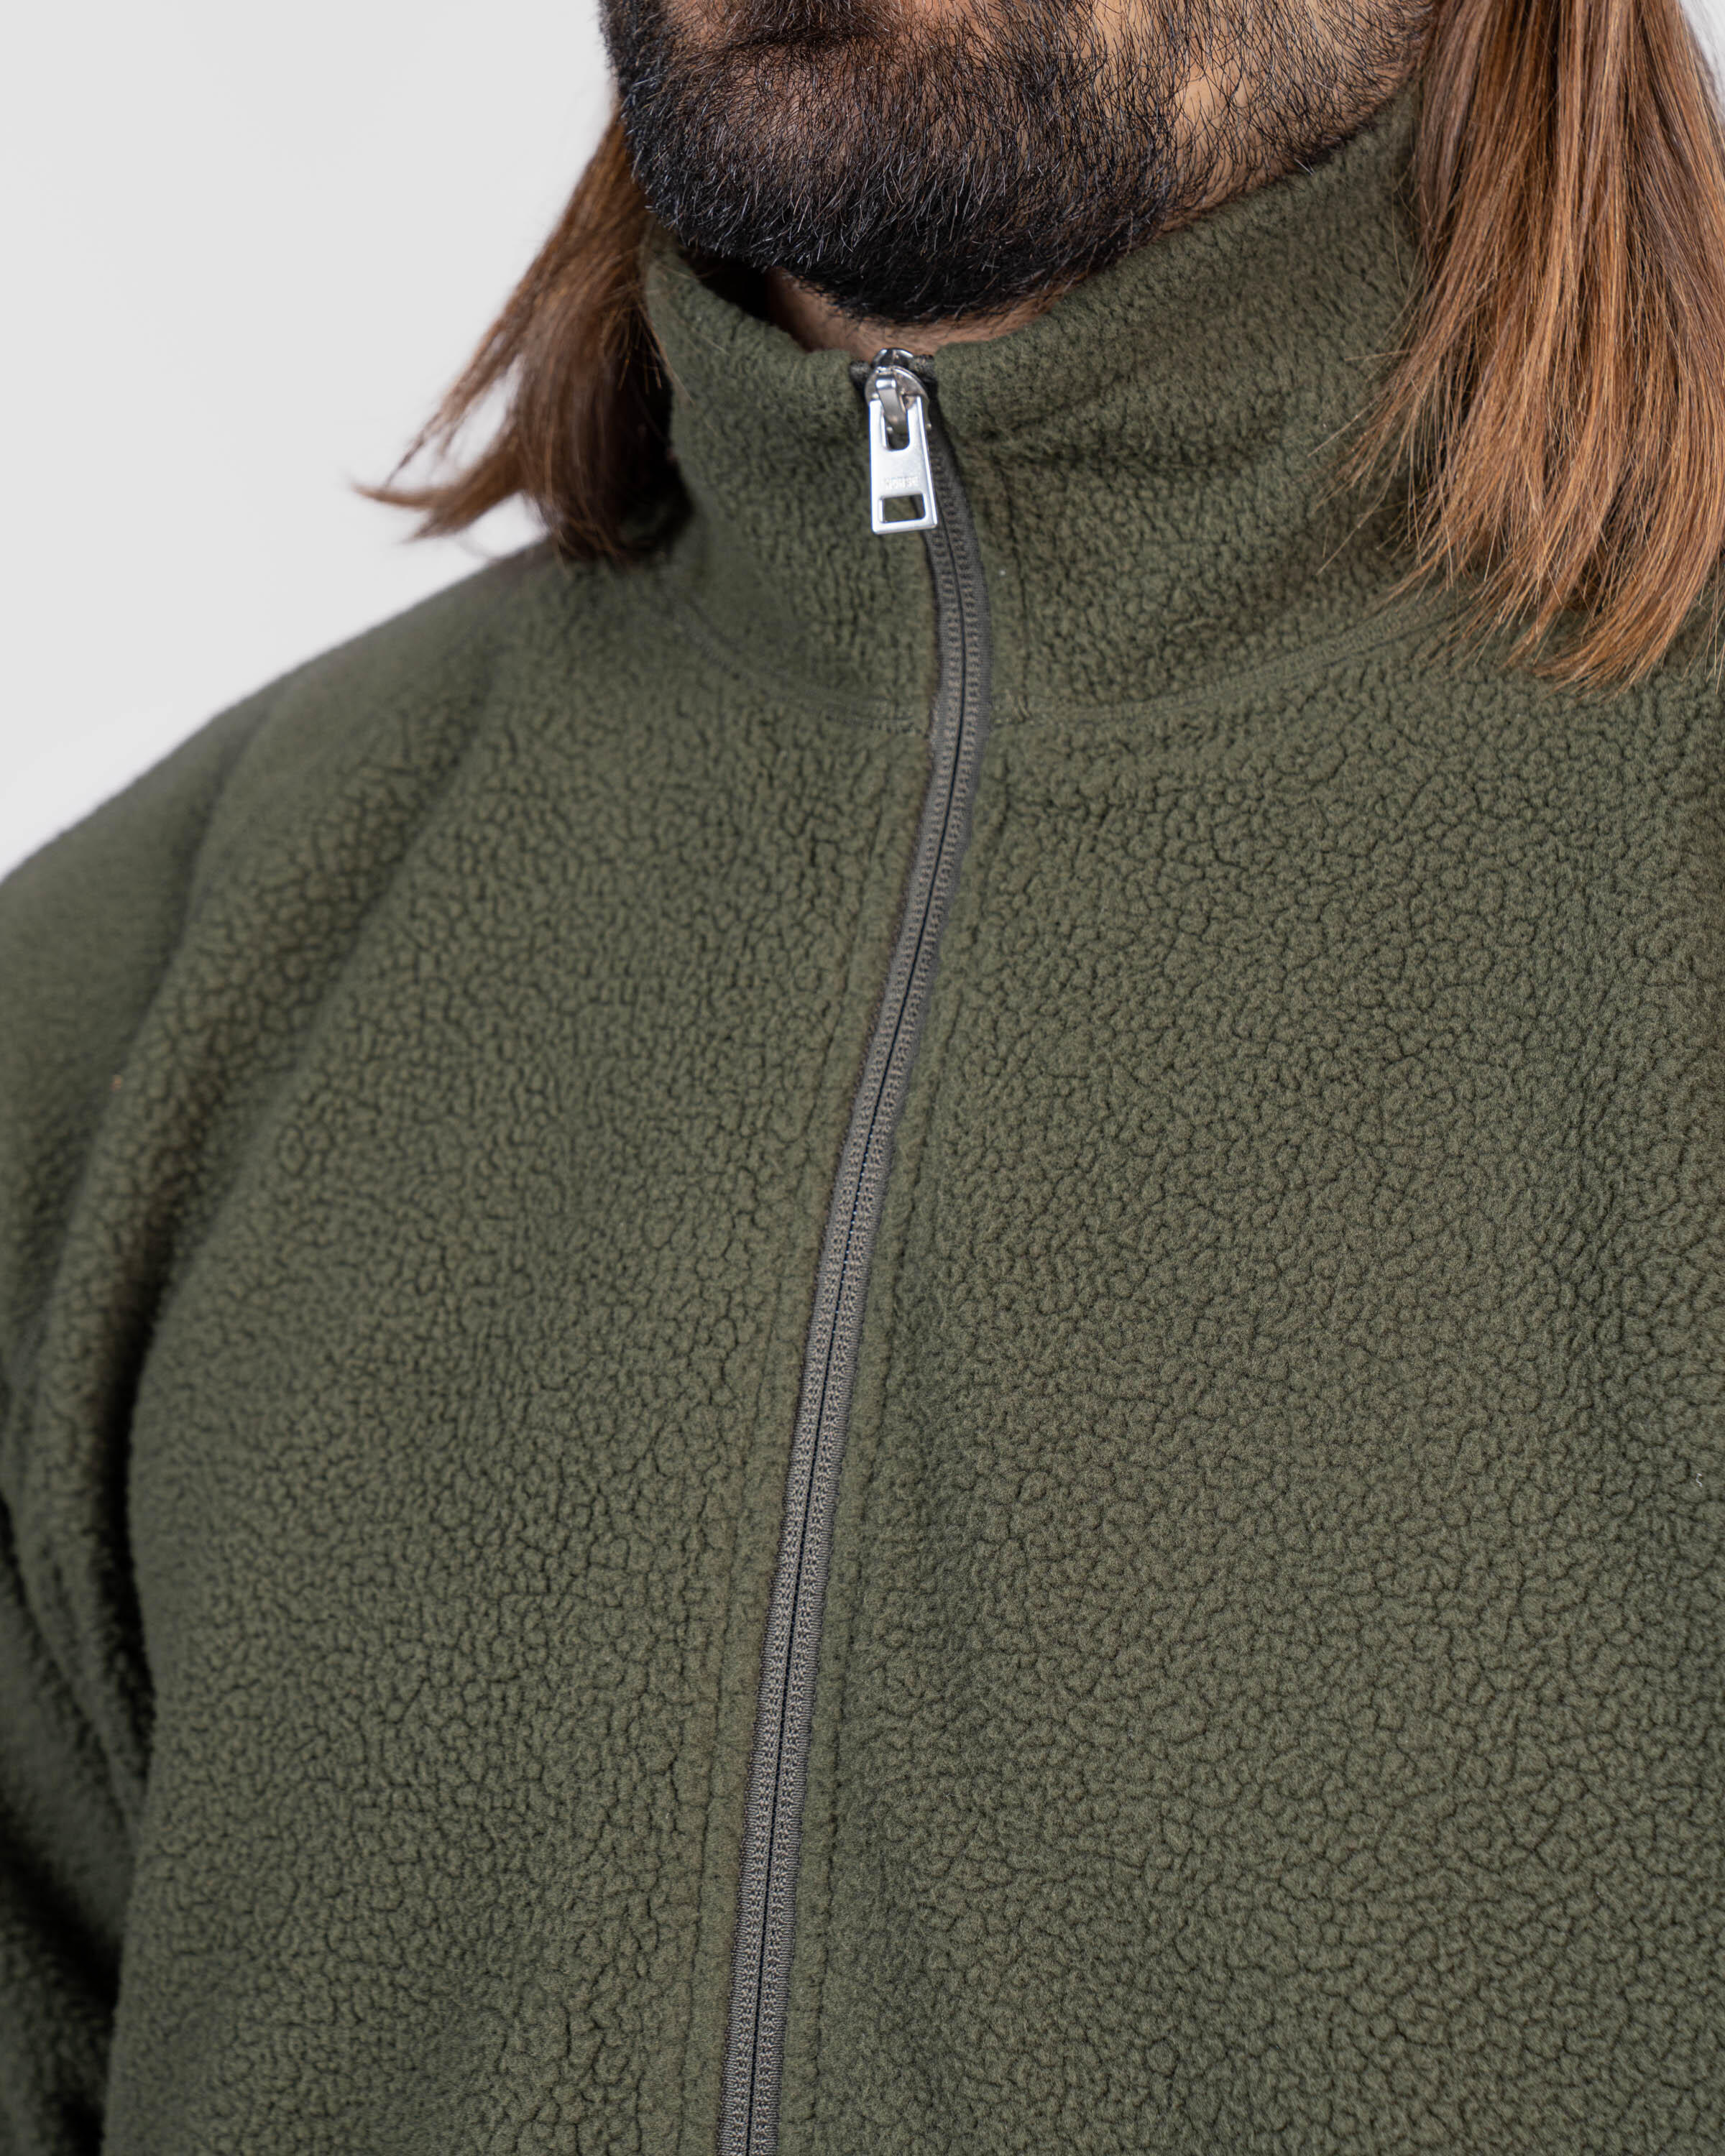 Norse Projects Tycho Full Zip Jacket